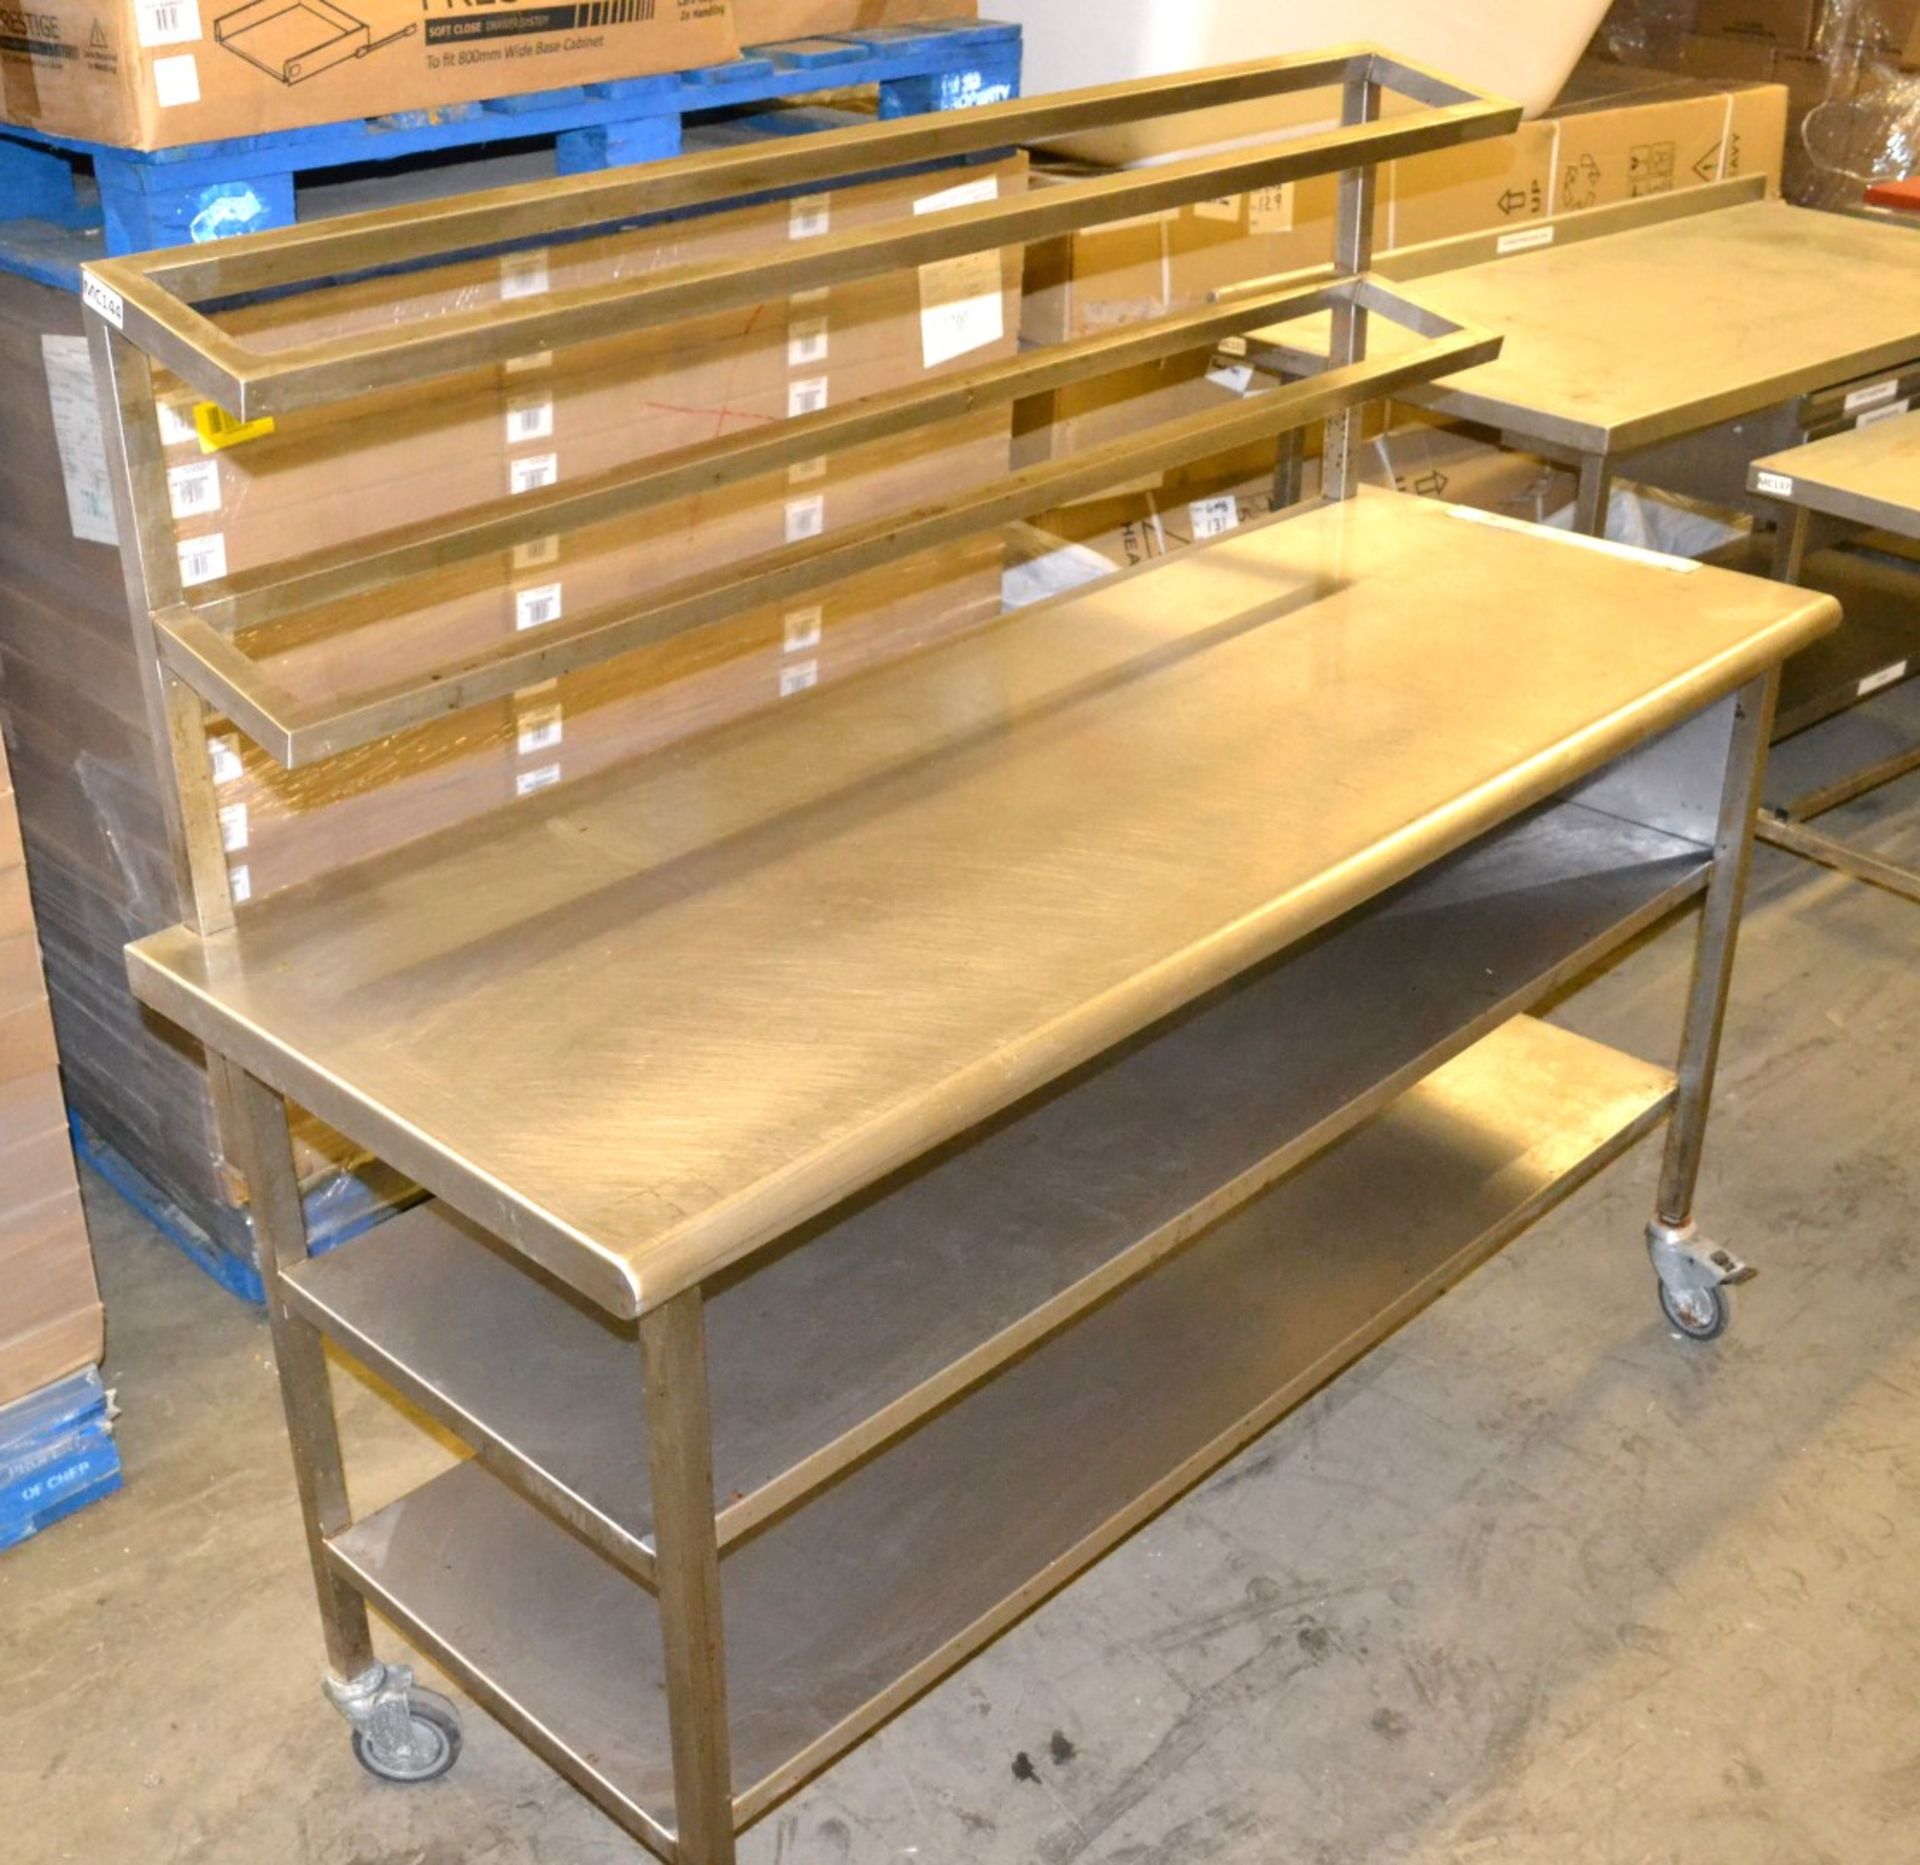 1 x Wheeled Stainless Steel Sandwich Preparation Table - Dimensions: 160 x 60 x 137.5cm - Ref: MC144 - Image 5 of 5